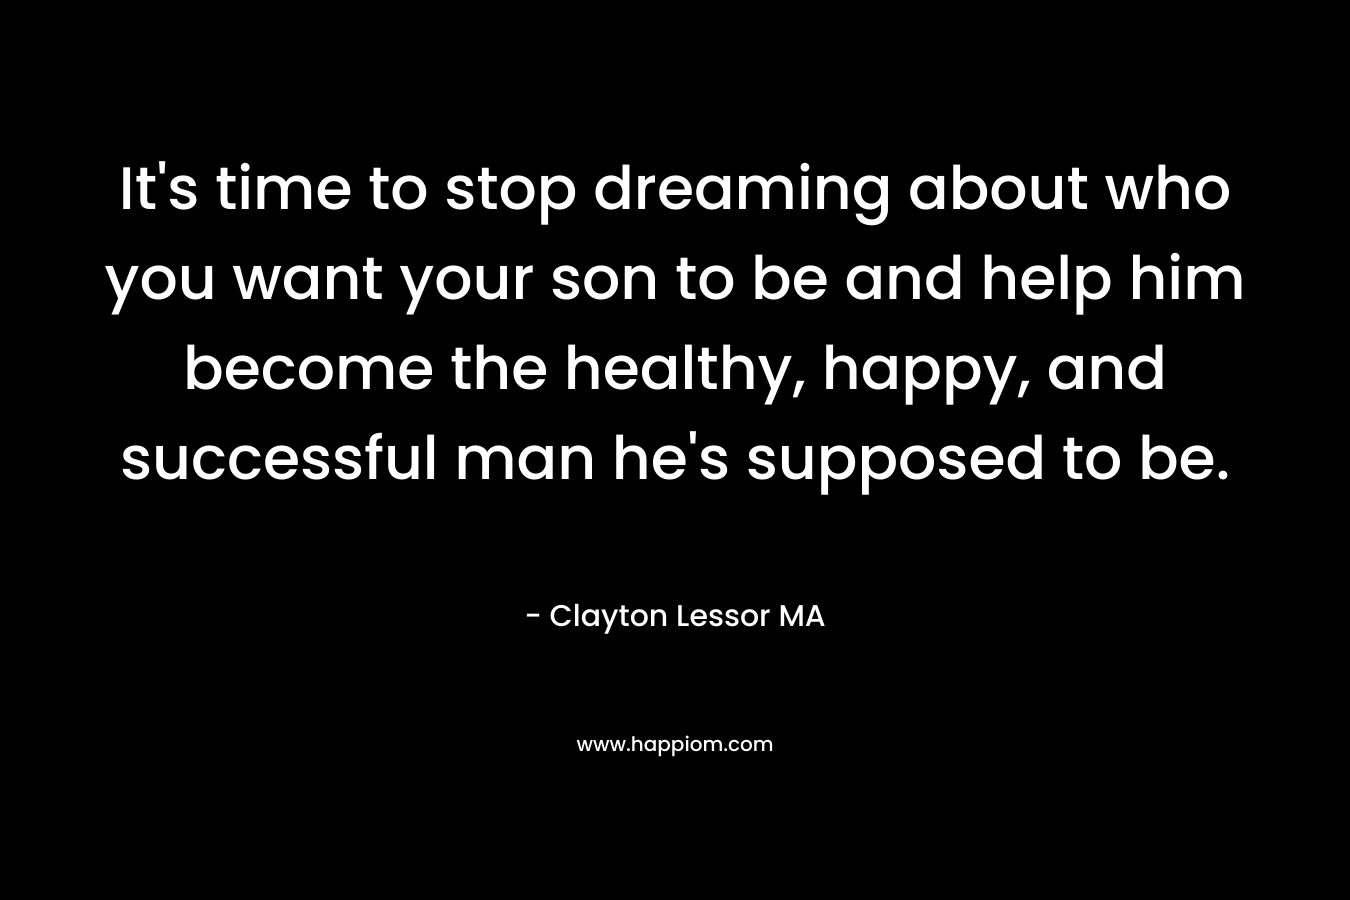 It’s time to stop dreaming about who you want your son to be and help him become the healthy, happy, and successful man he’s supposed to be. – Clayton Lessor MA